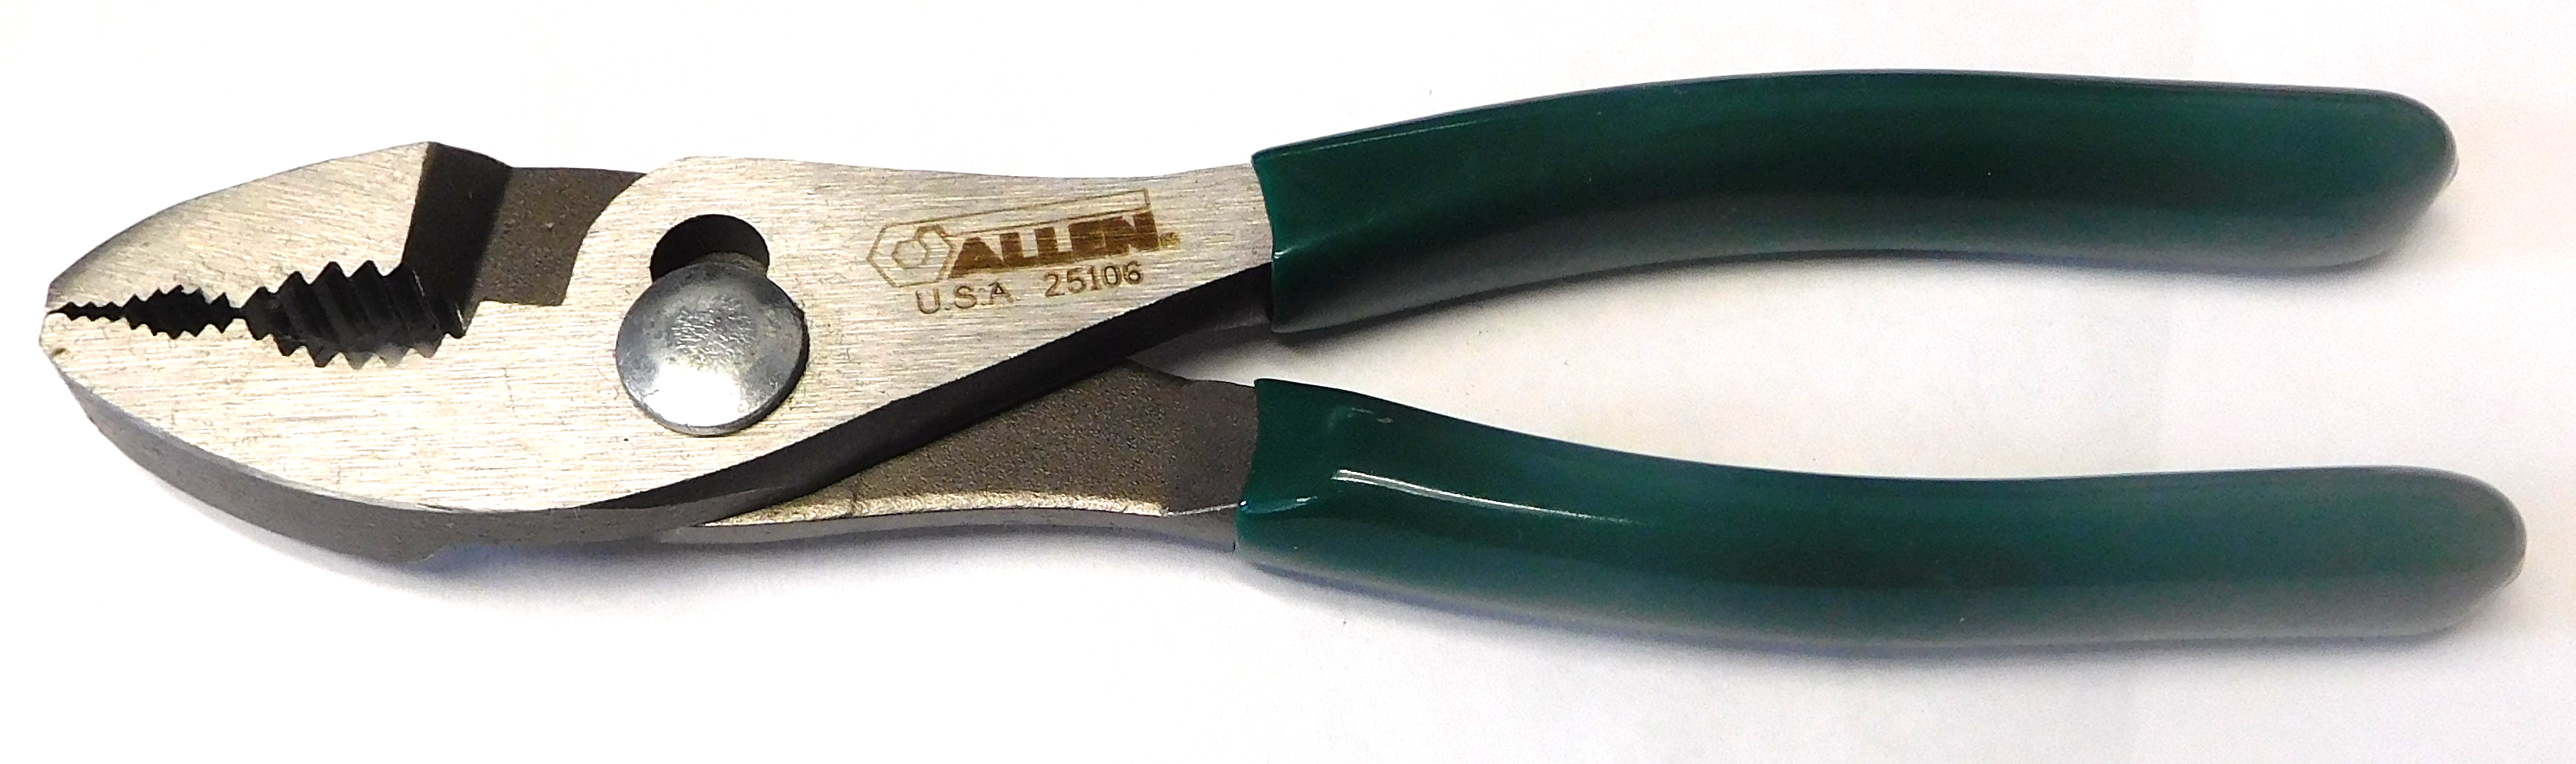 Allen 25106 6" Slip Joint Pliers with Grip USA